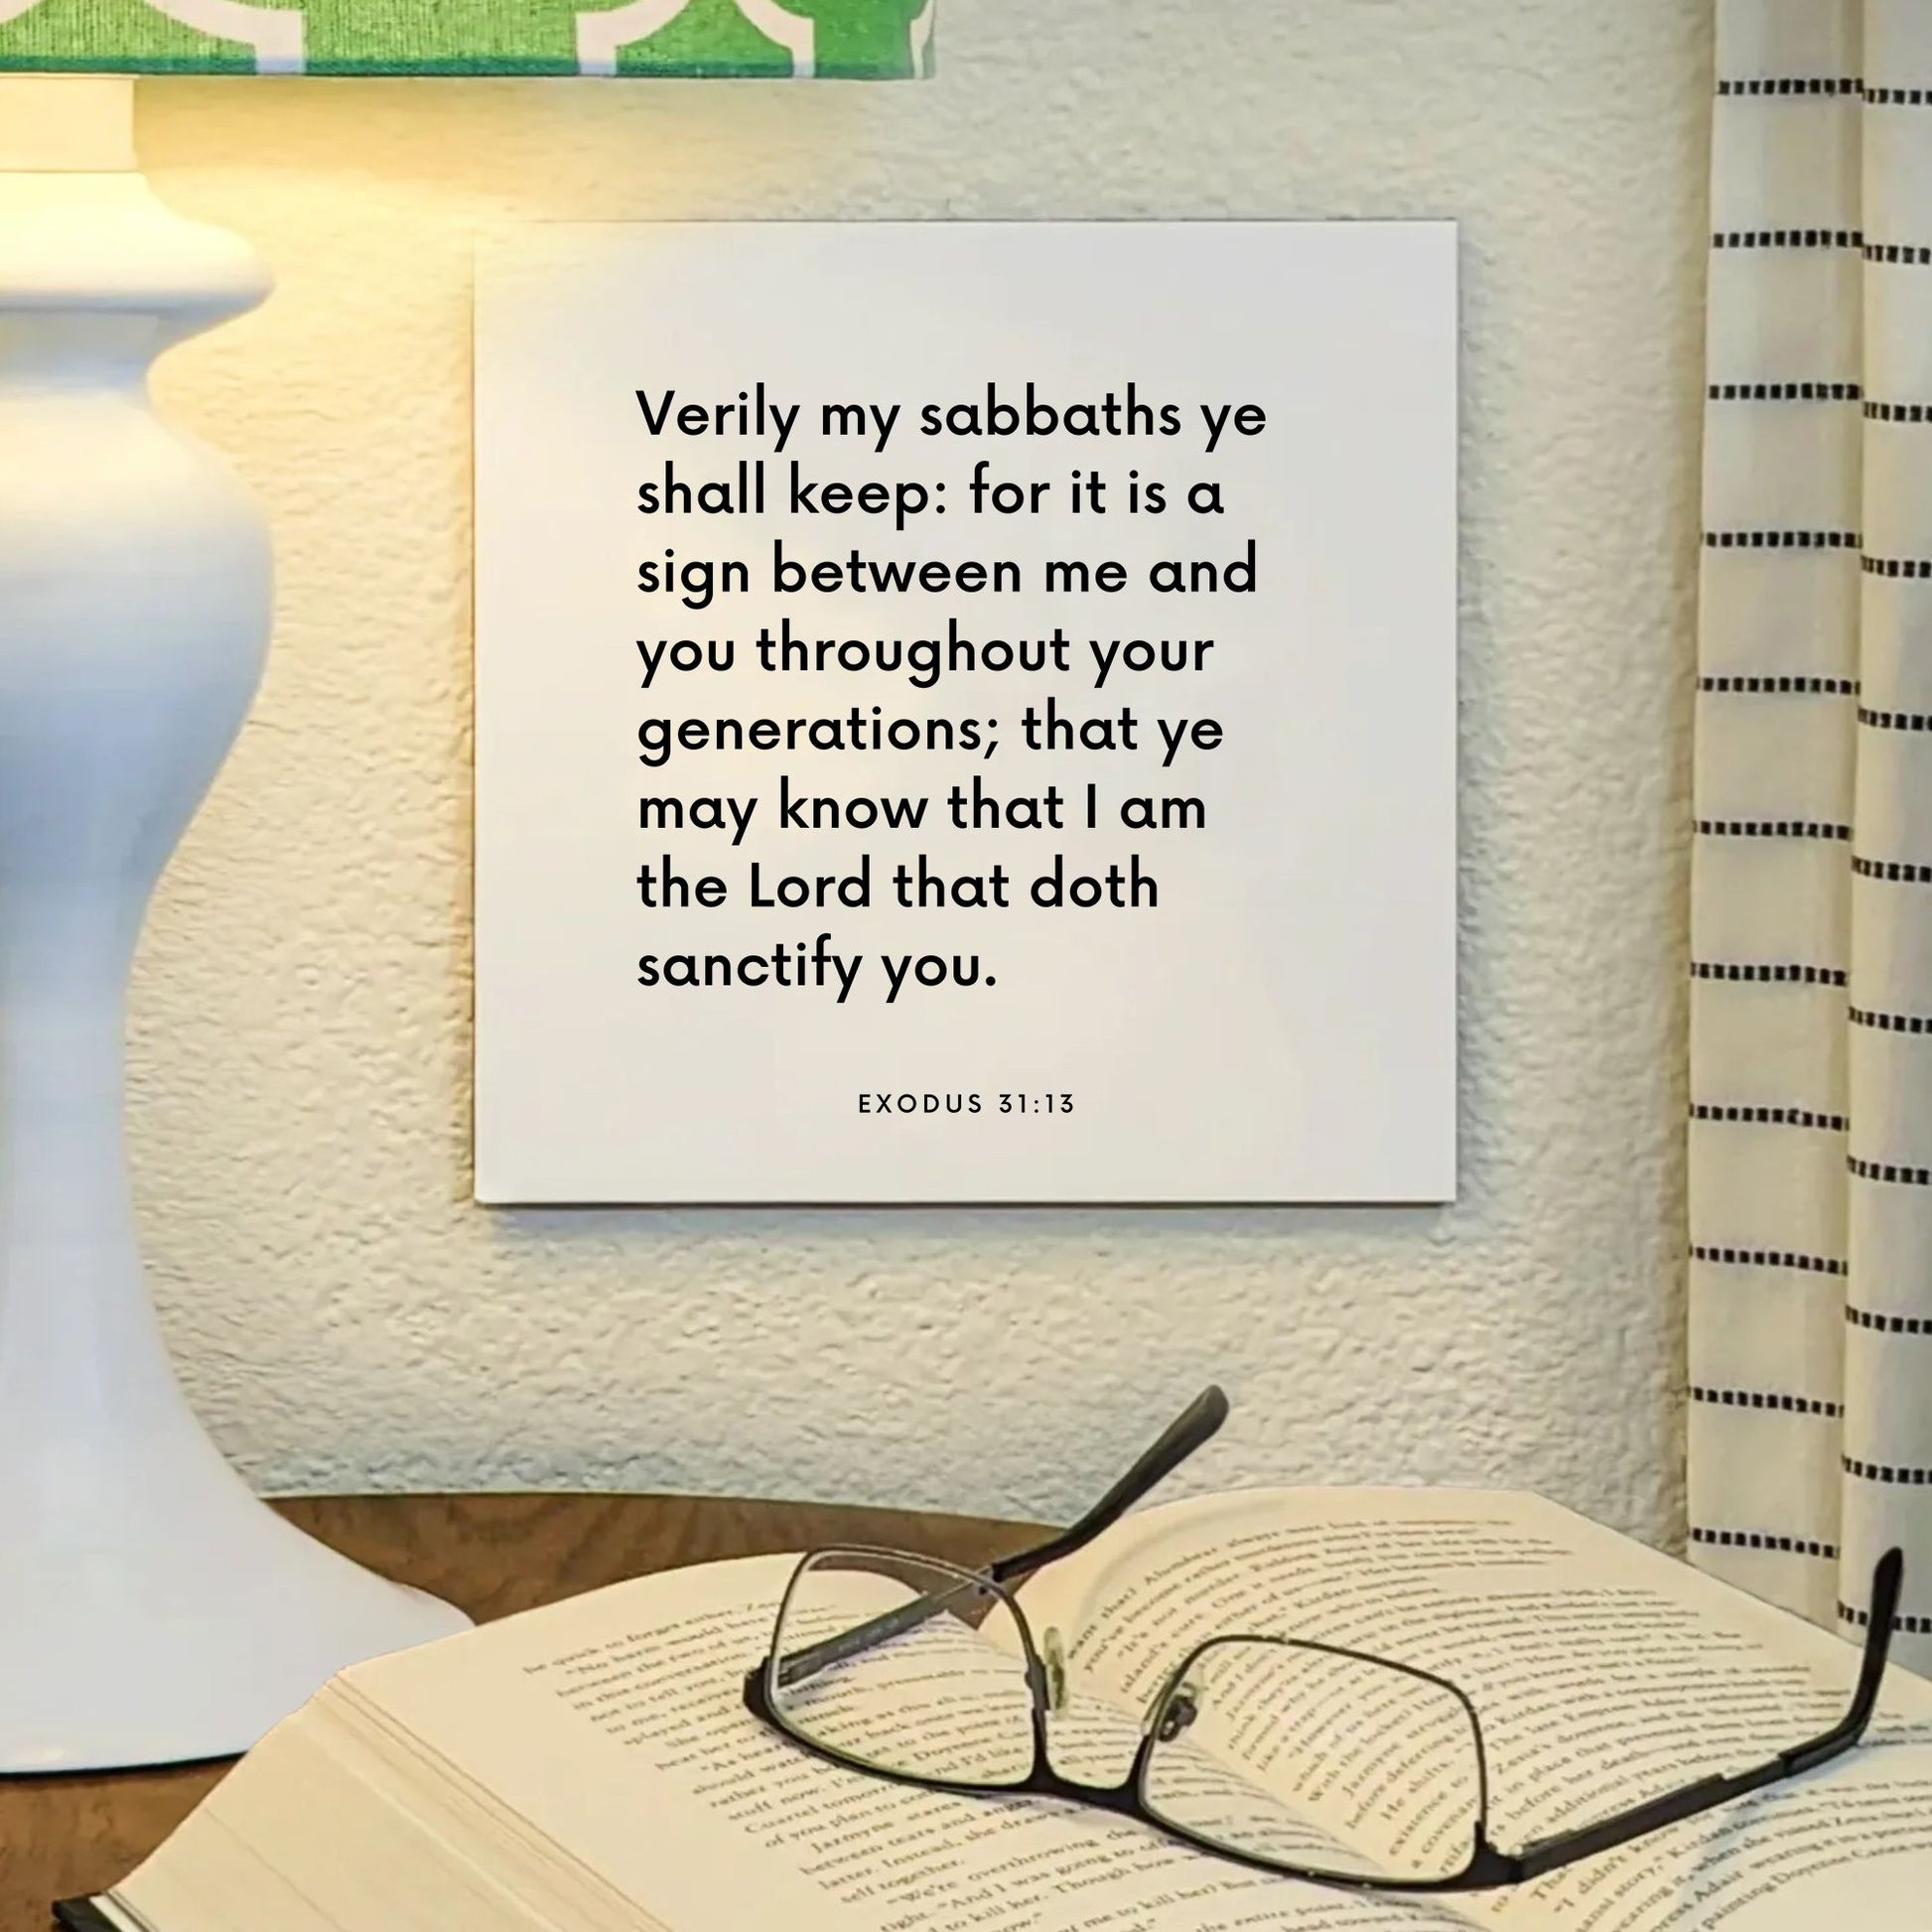 Lamp mouting of the scripture tile for Exodus 31:13 - "Verily my sabbaths ye shall keep"